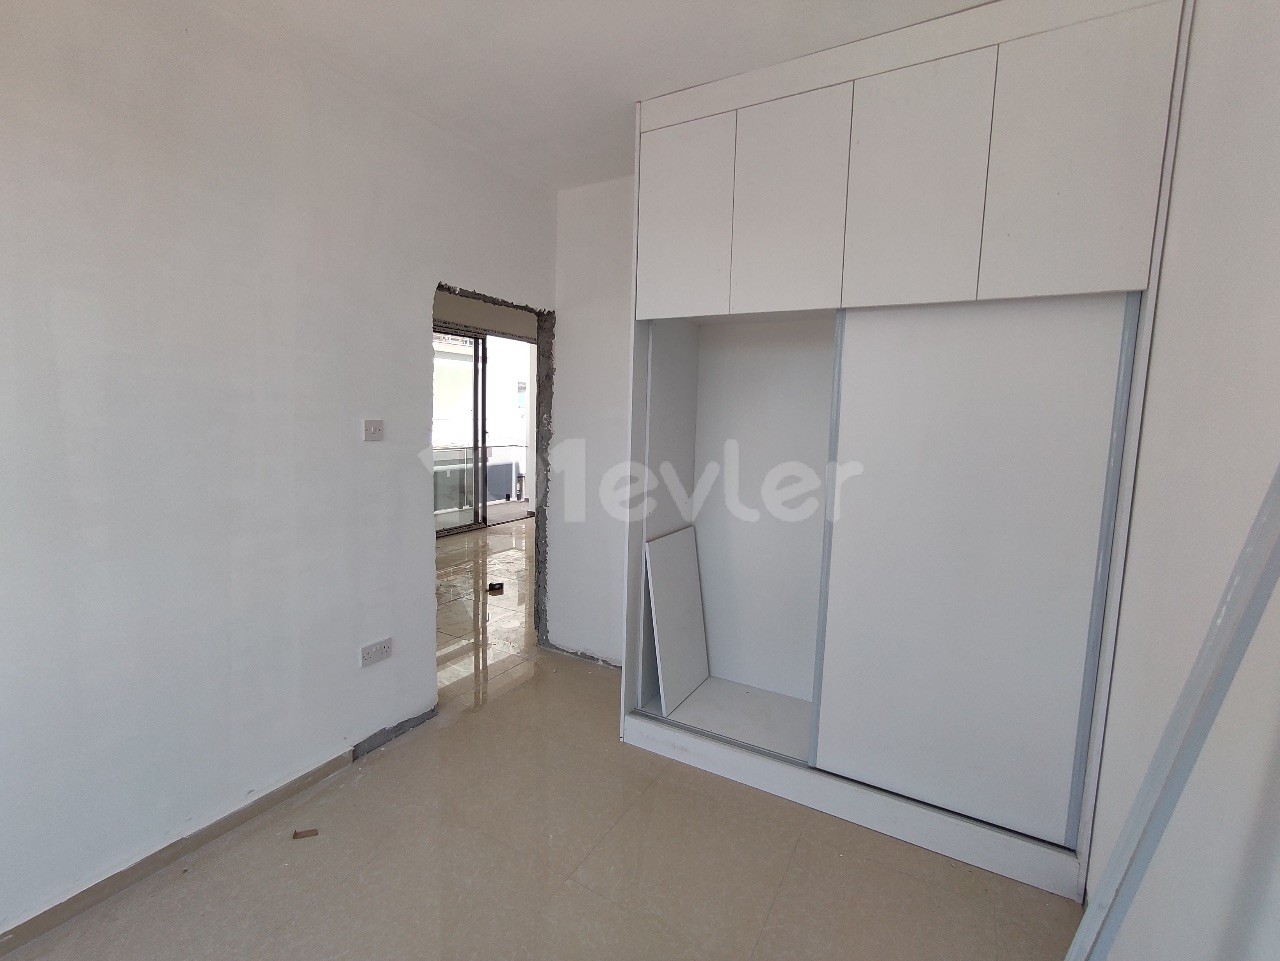 2 + 1 Apartments for Sale in the Canakkale Region from Ozkaraman